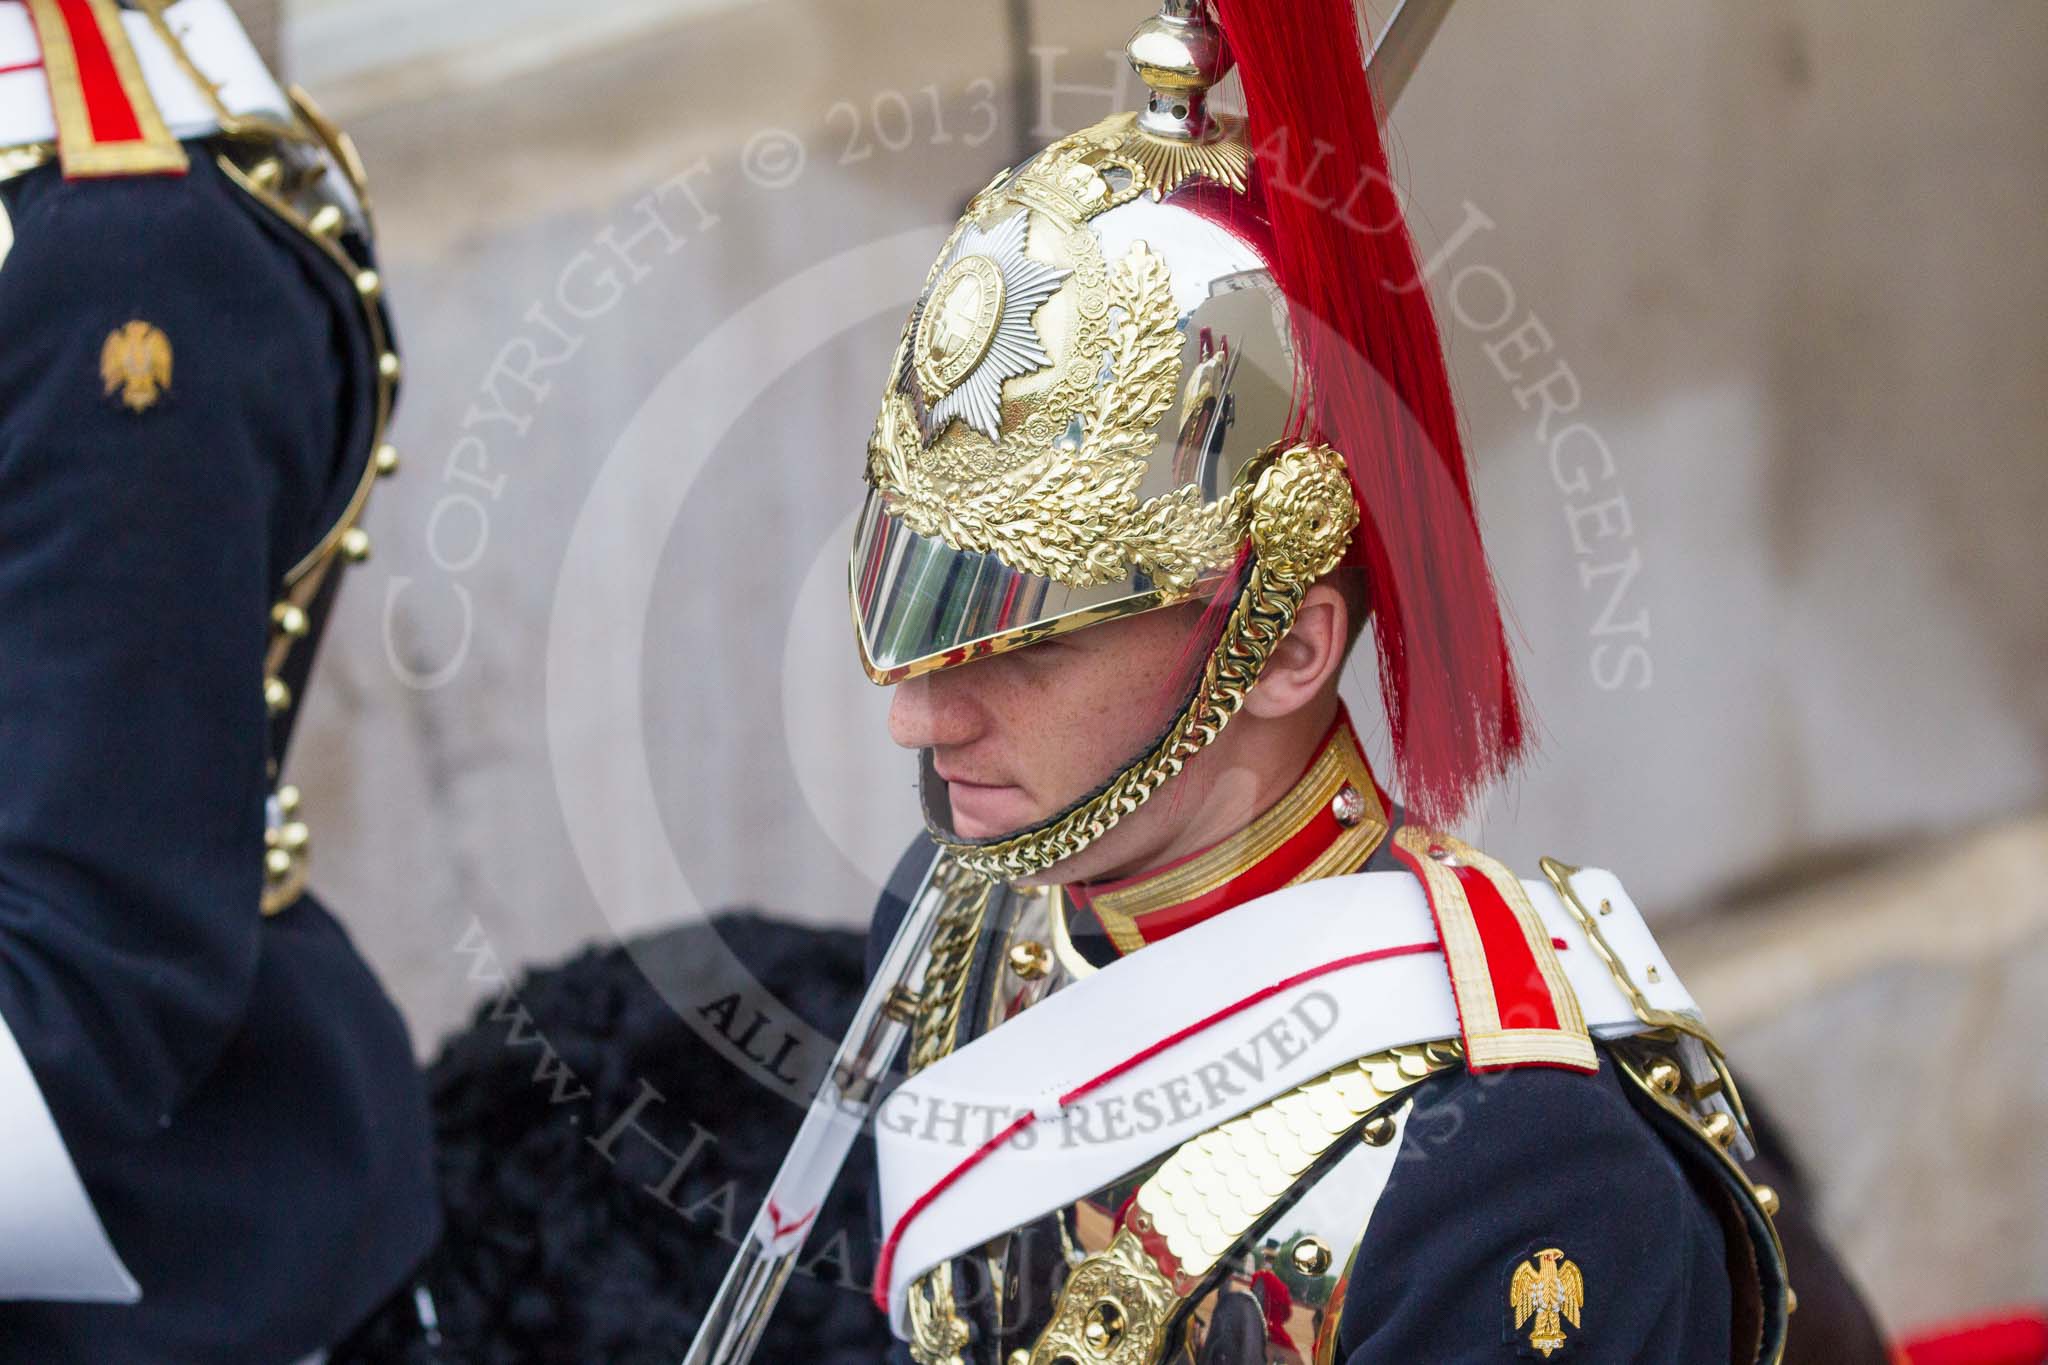 Trooping the Colour 2015. Image #629, 13 June 2015 12:00 Horse Guards Parade, London, UK